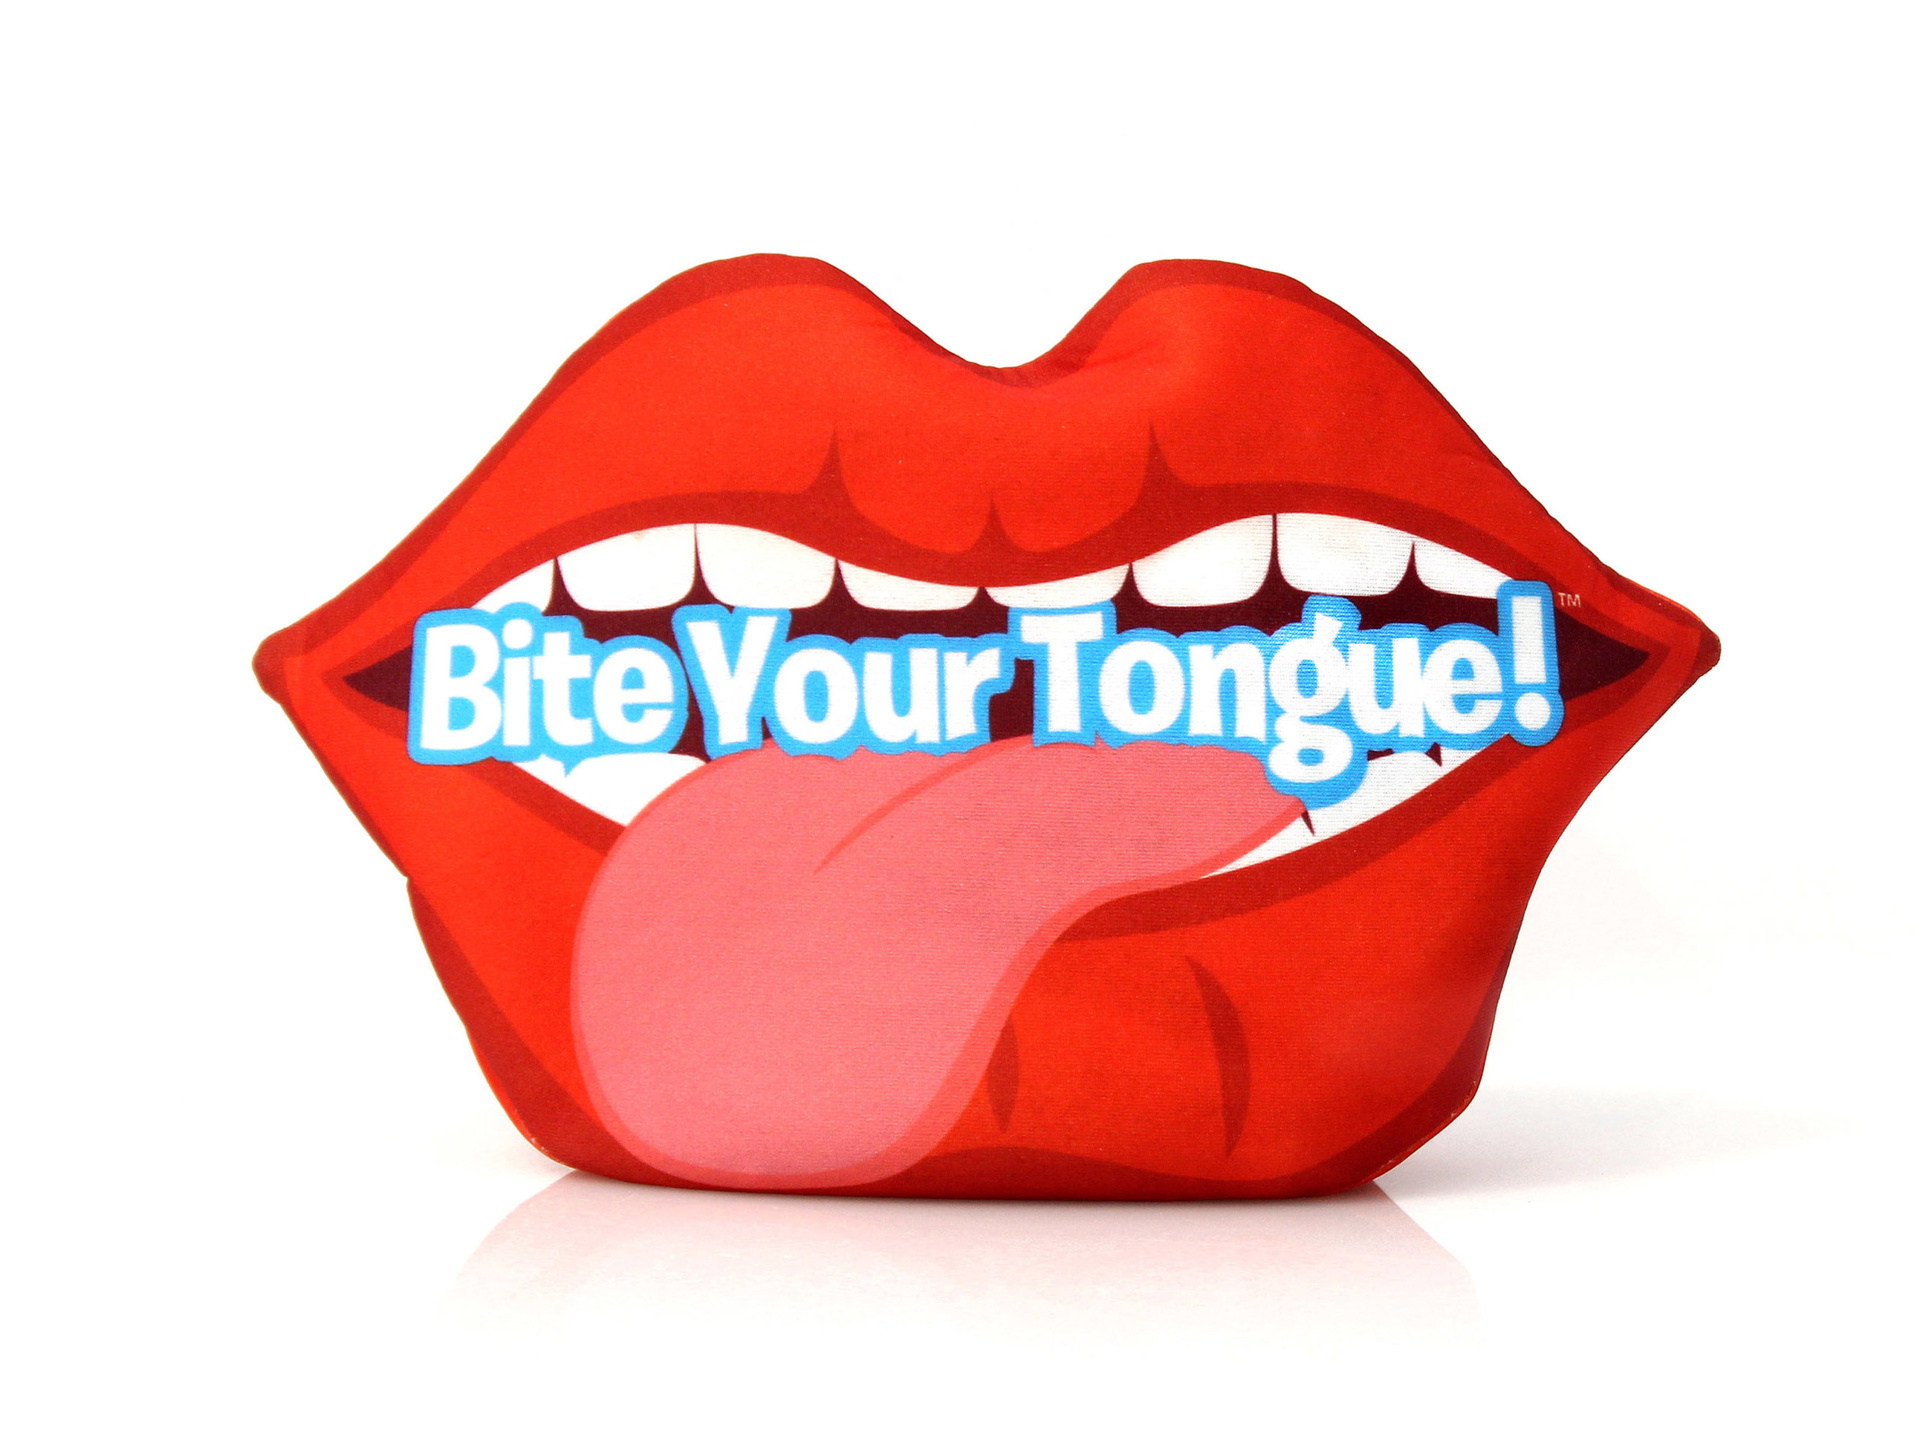 Bite your tongue